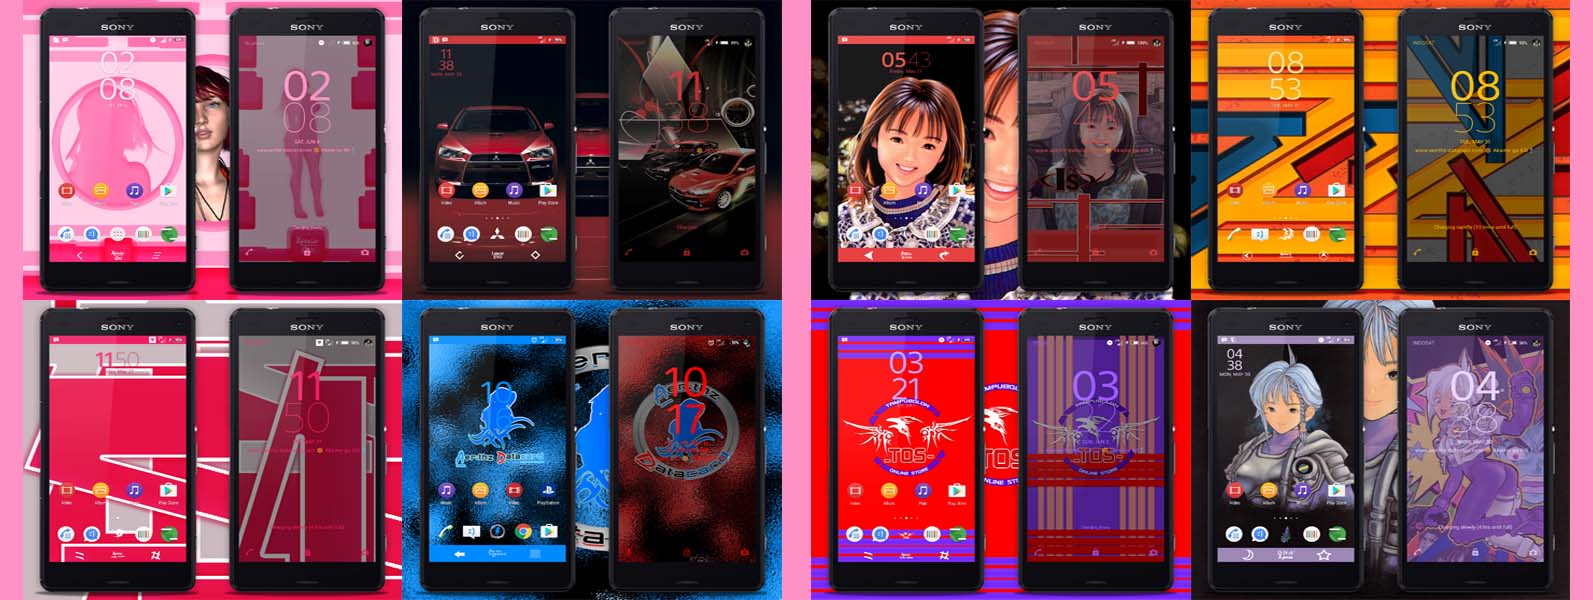 Xperia Themes Project